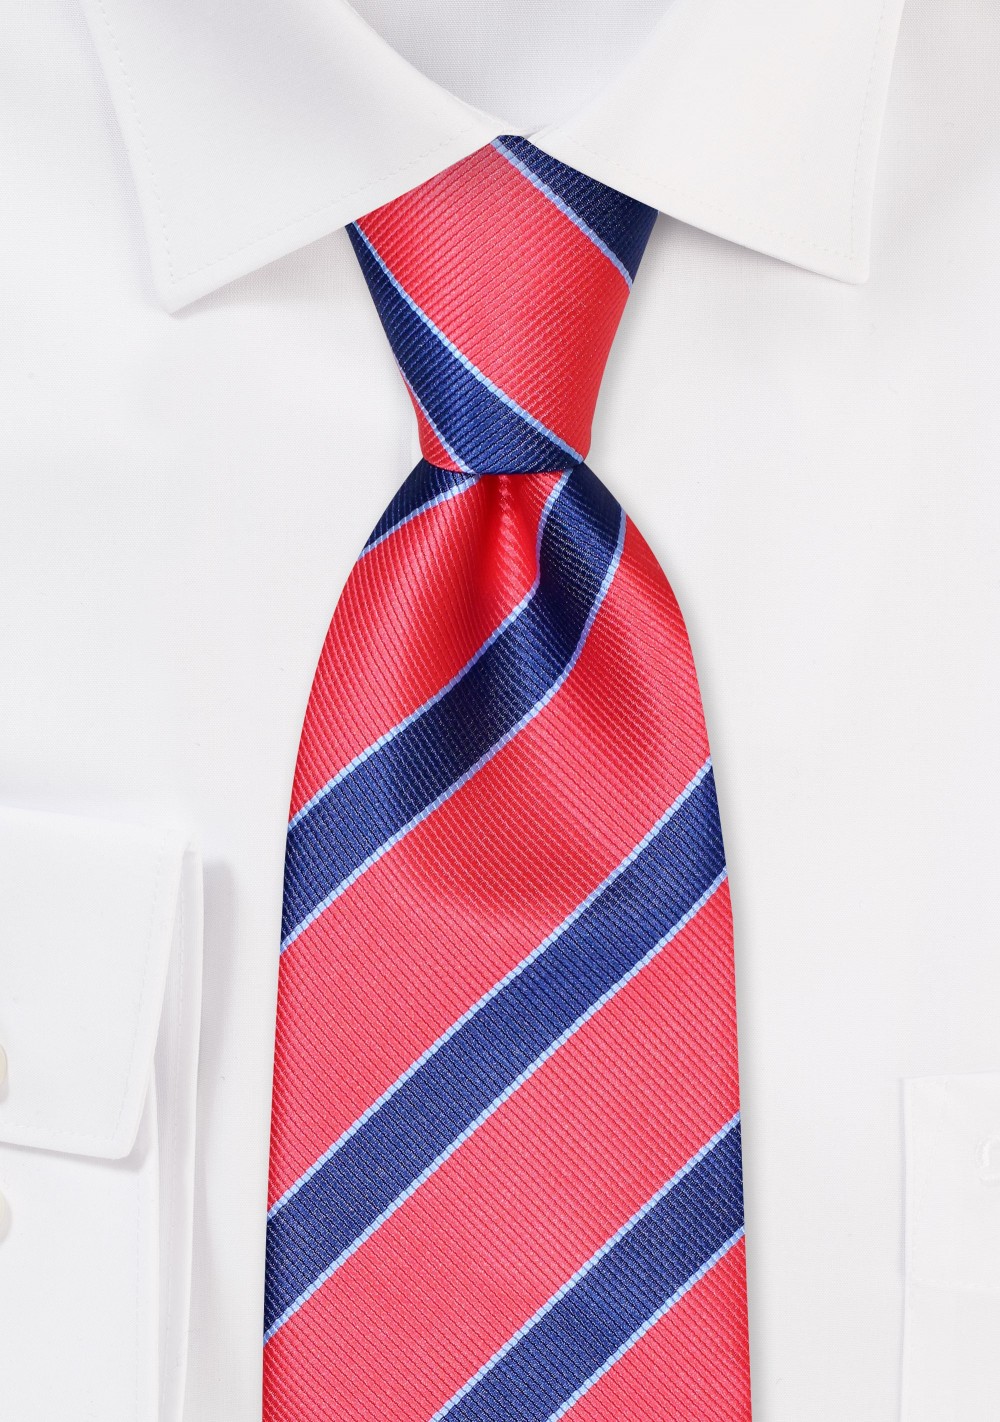 Coral and Navy Repp Striped Tie